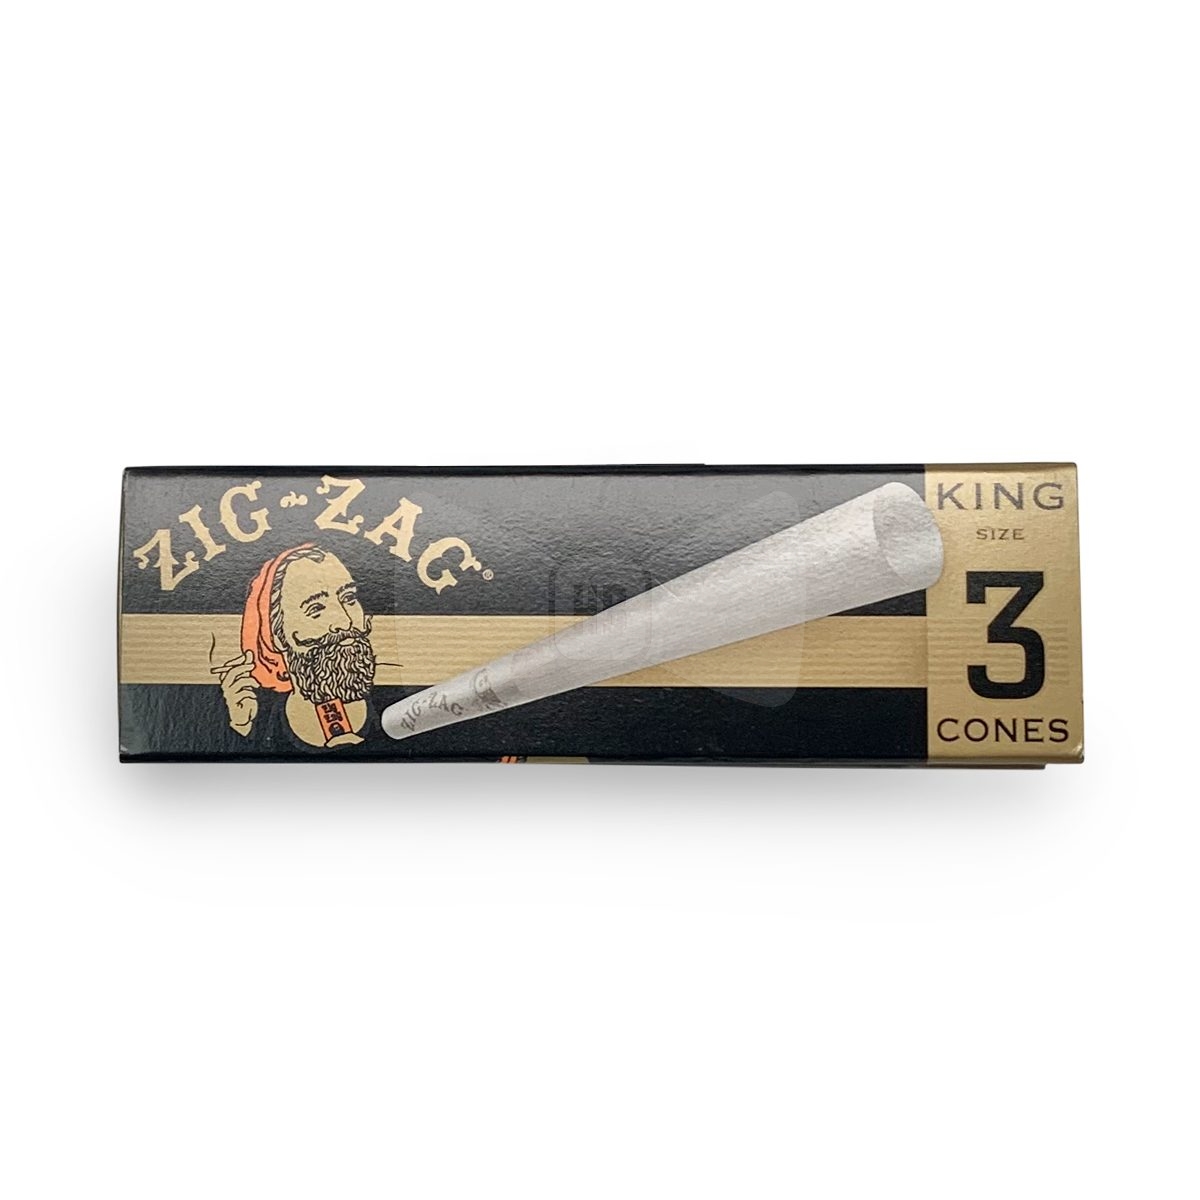 Zig Zag King Size Cones Single Pack